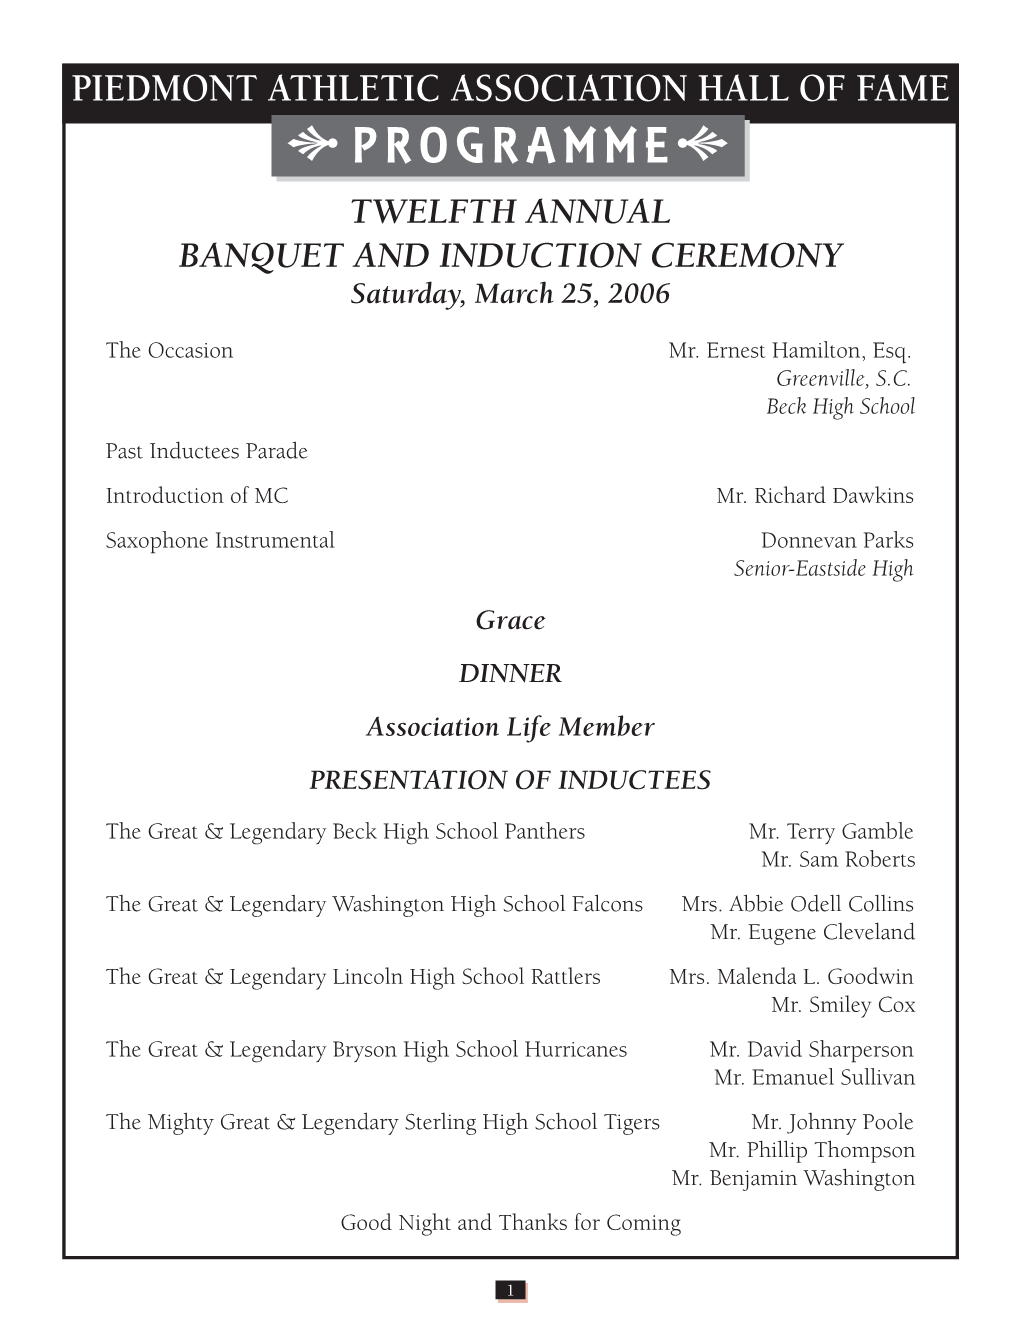 PROGRAMME Twelfth Annual Banquet and Induction Ceremony Saturday, March 25, 2006